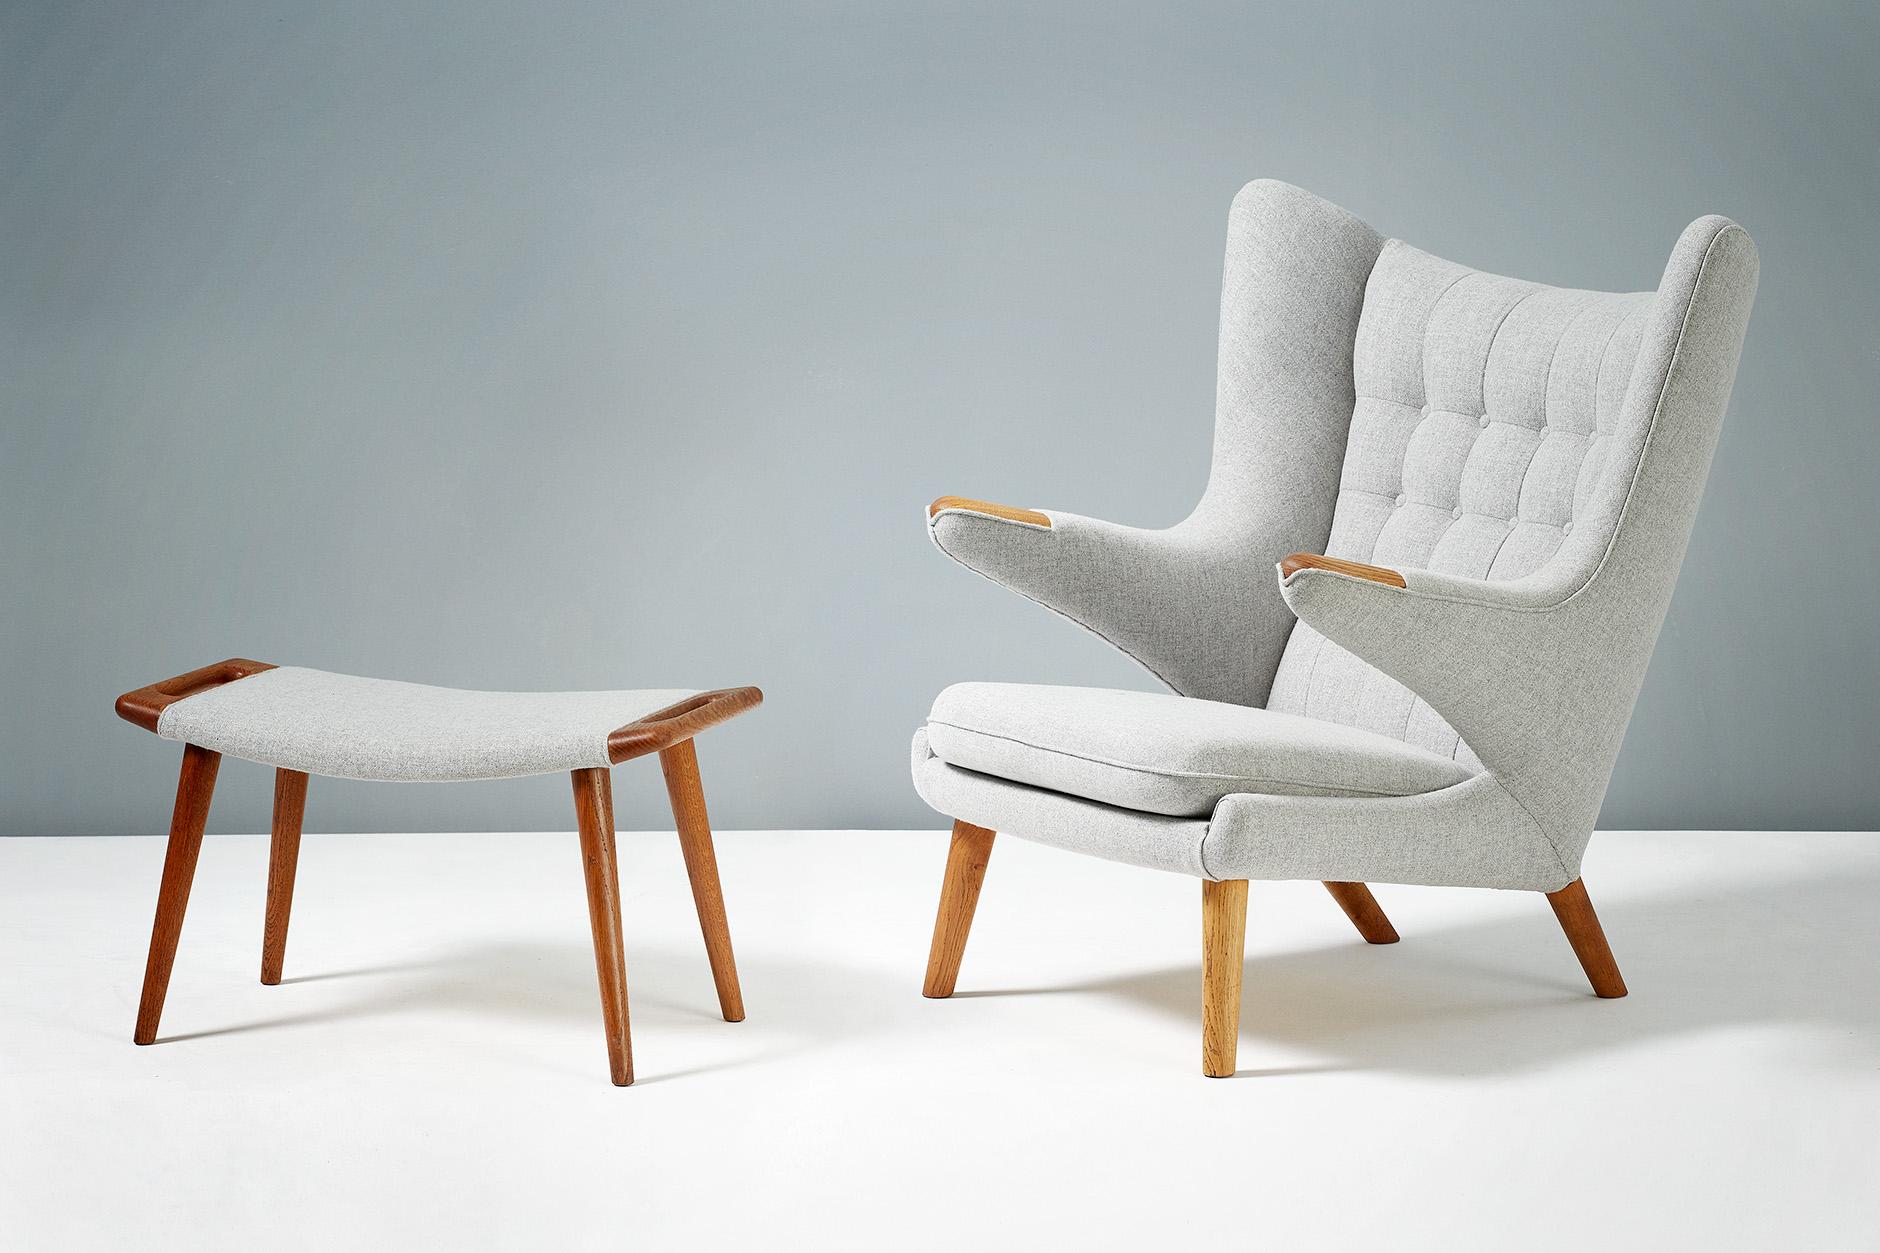 Hans J. Wegner

AP-19 Papa Bear chair and AP-29 ottoman, 1953

One of Wegner's most iconic designs. Produced by A.P. Stolen, Denmark. Oak 'paws' and legs on the armchair and matching oak legs and handles on the ottoman. These examples have been